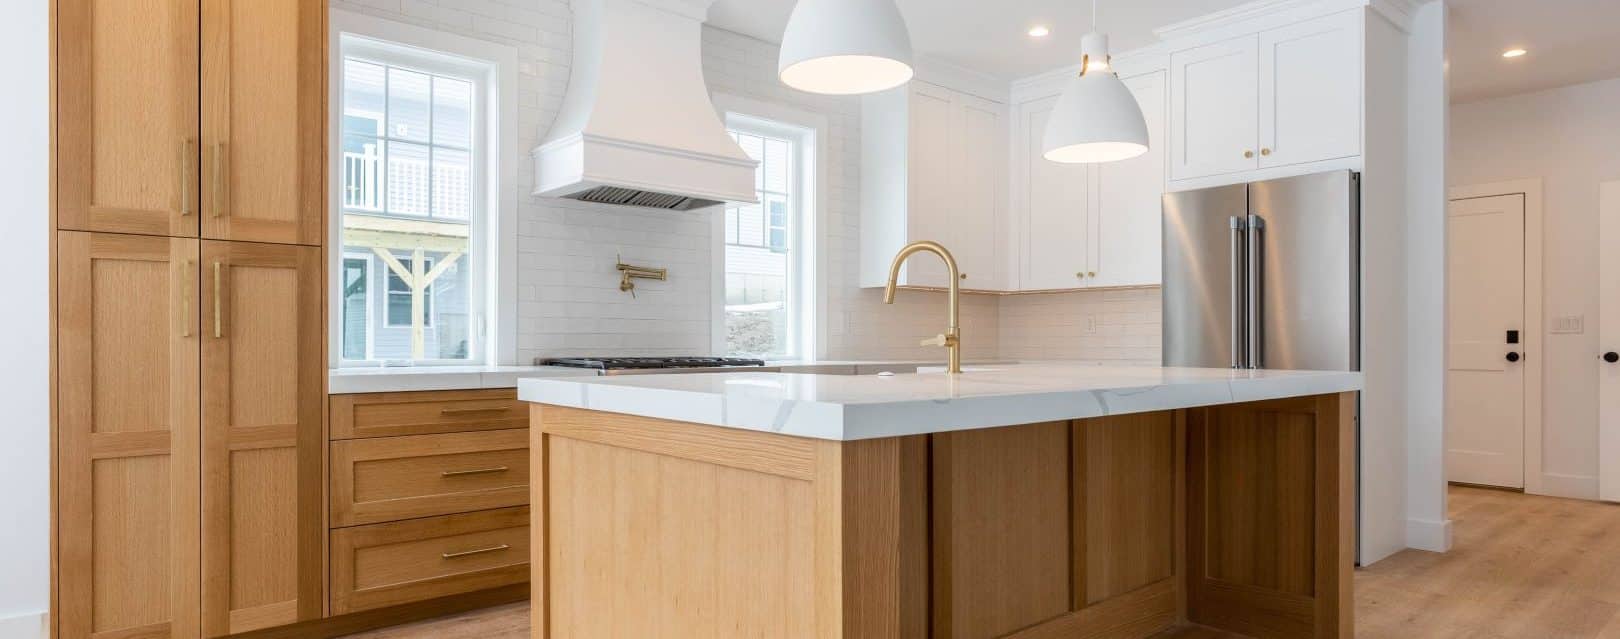 A brightly-lit kitchen with white upper and natural custom wood lower cabinets. There is a large center island with a white quartz countertop. There is custom crown moulding on the ceiling.